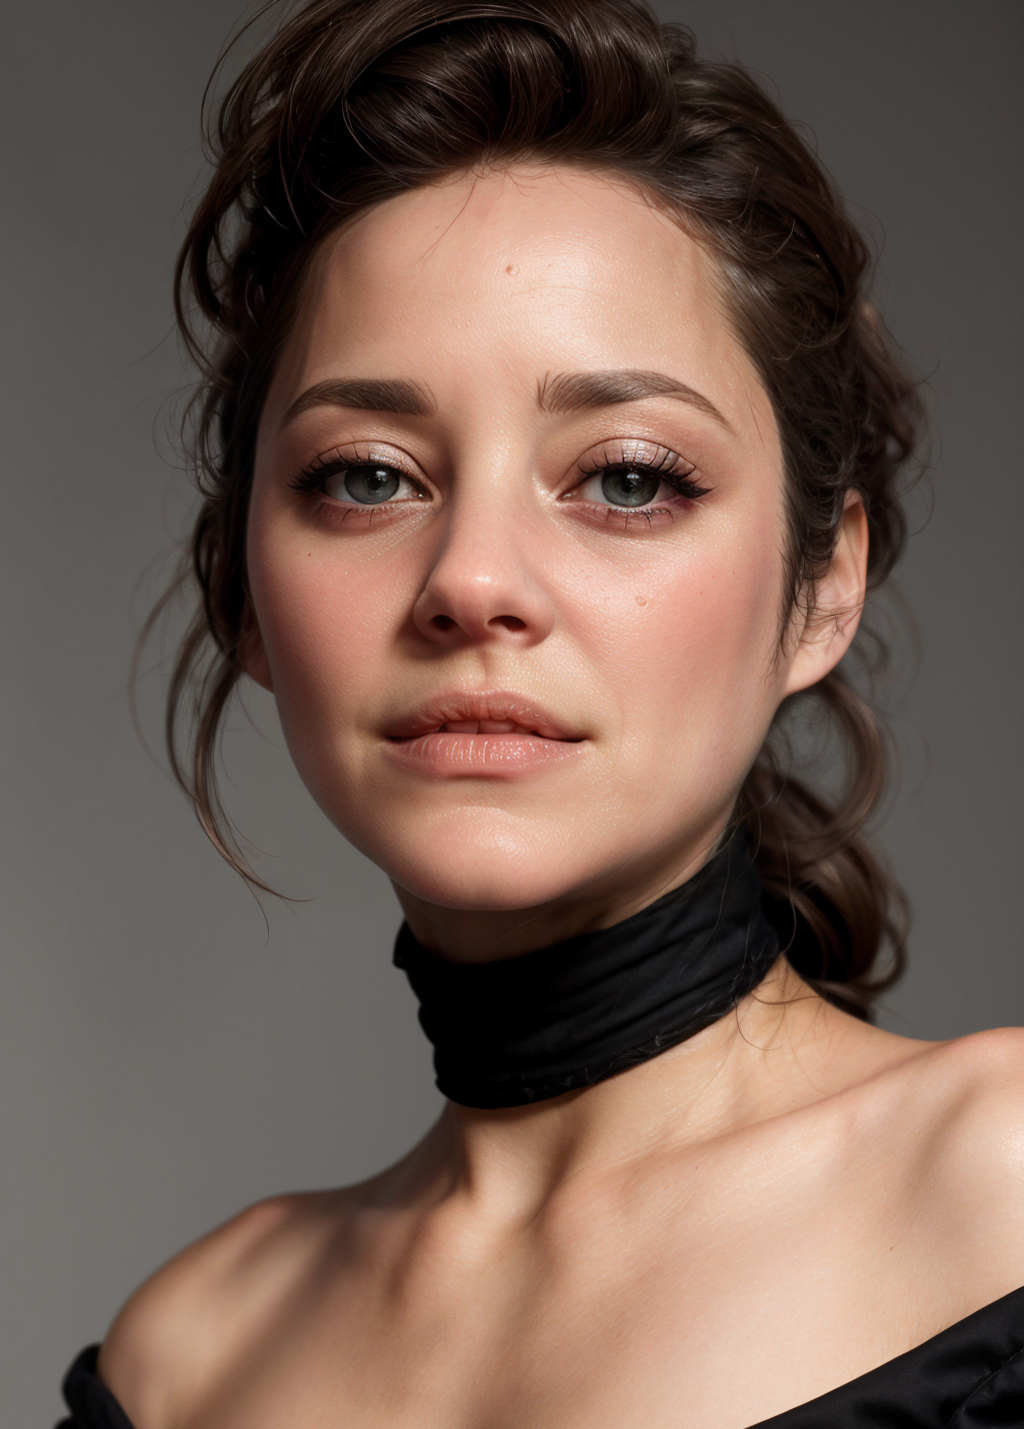 Marion Cotillard - French actress image by Ggrue